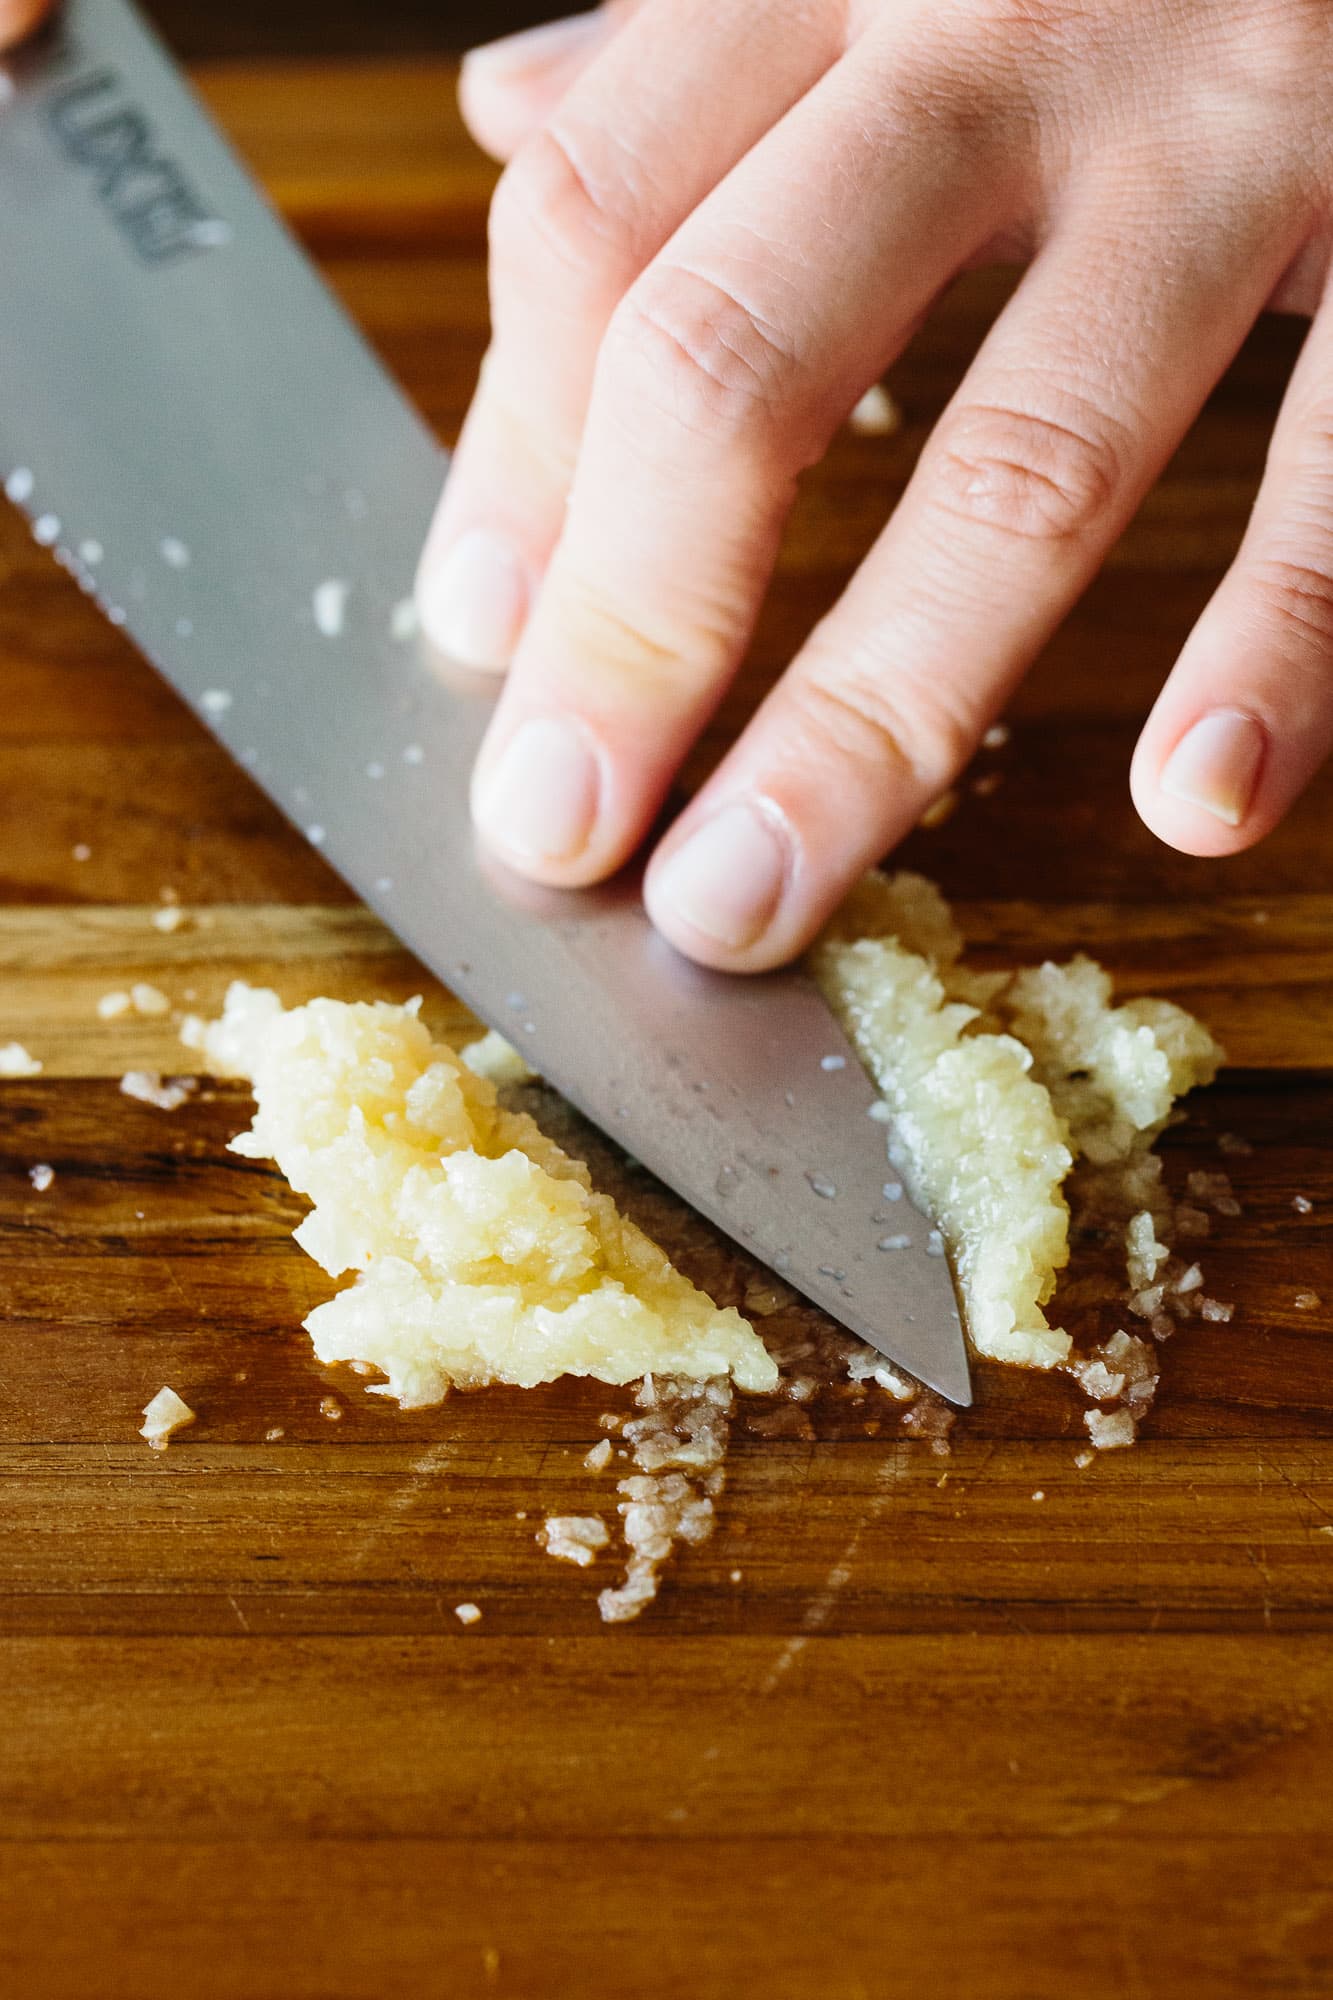 How To Make Garlic Paste with Just Salt & a Knife